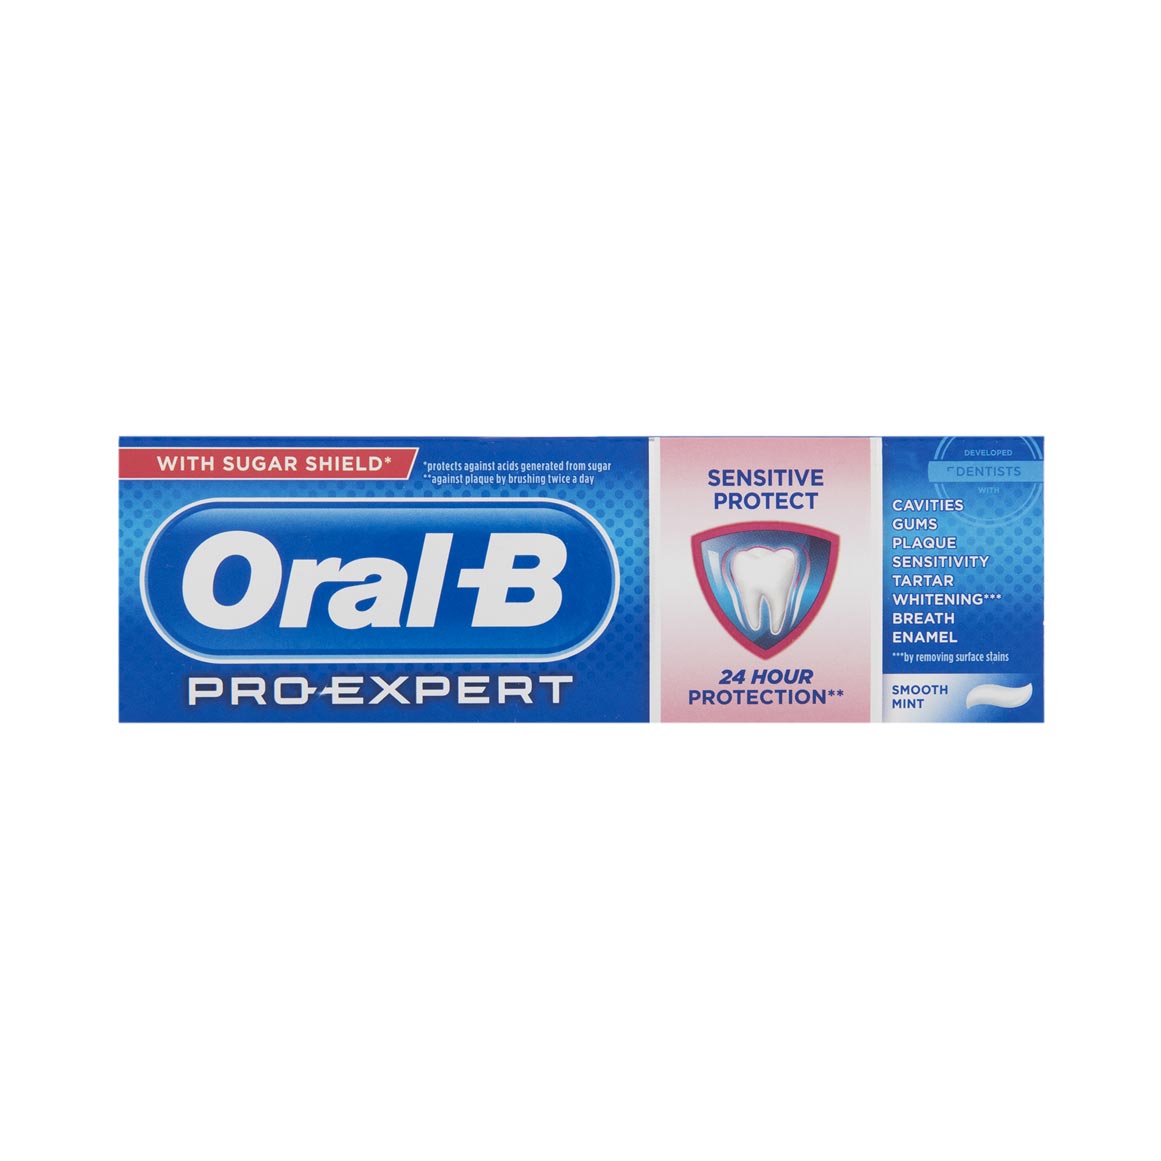 Oral-B Pro-Expert Sensitive Protect Toothpaste 75 ml | Woolworths.co.za